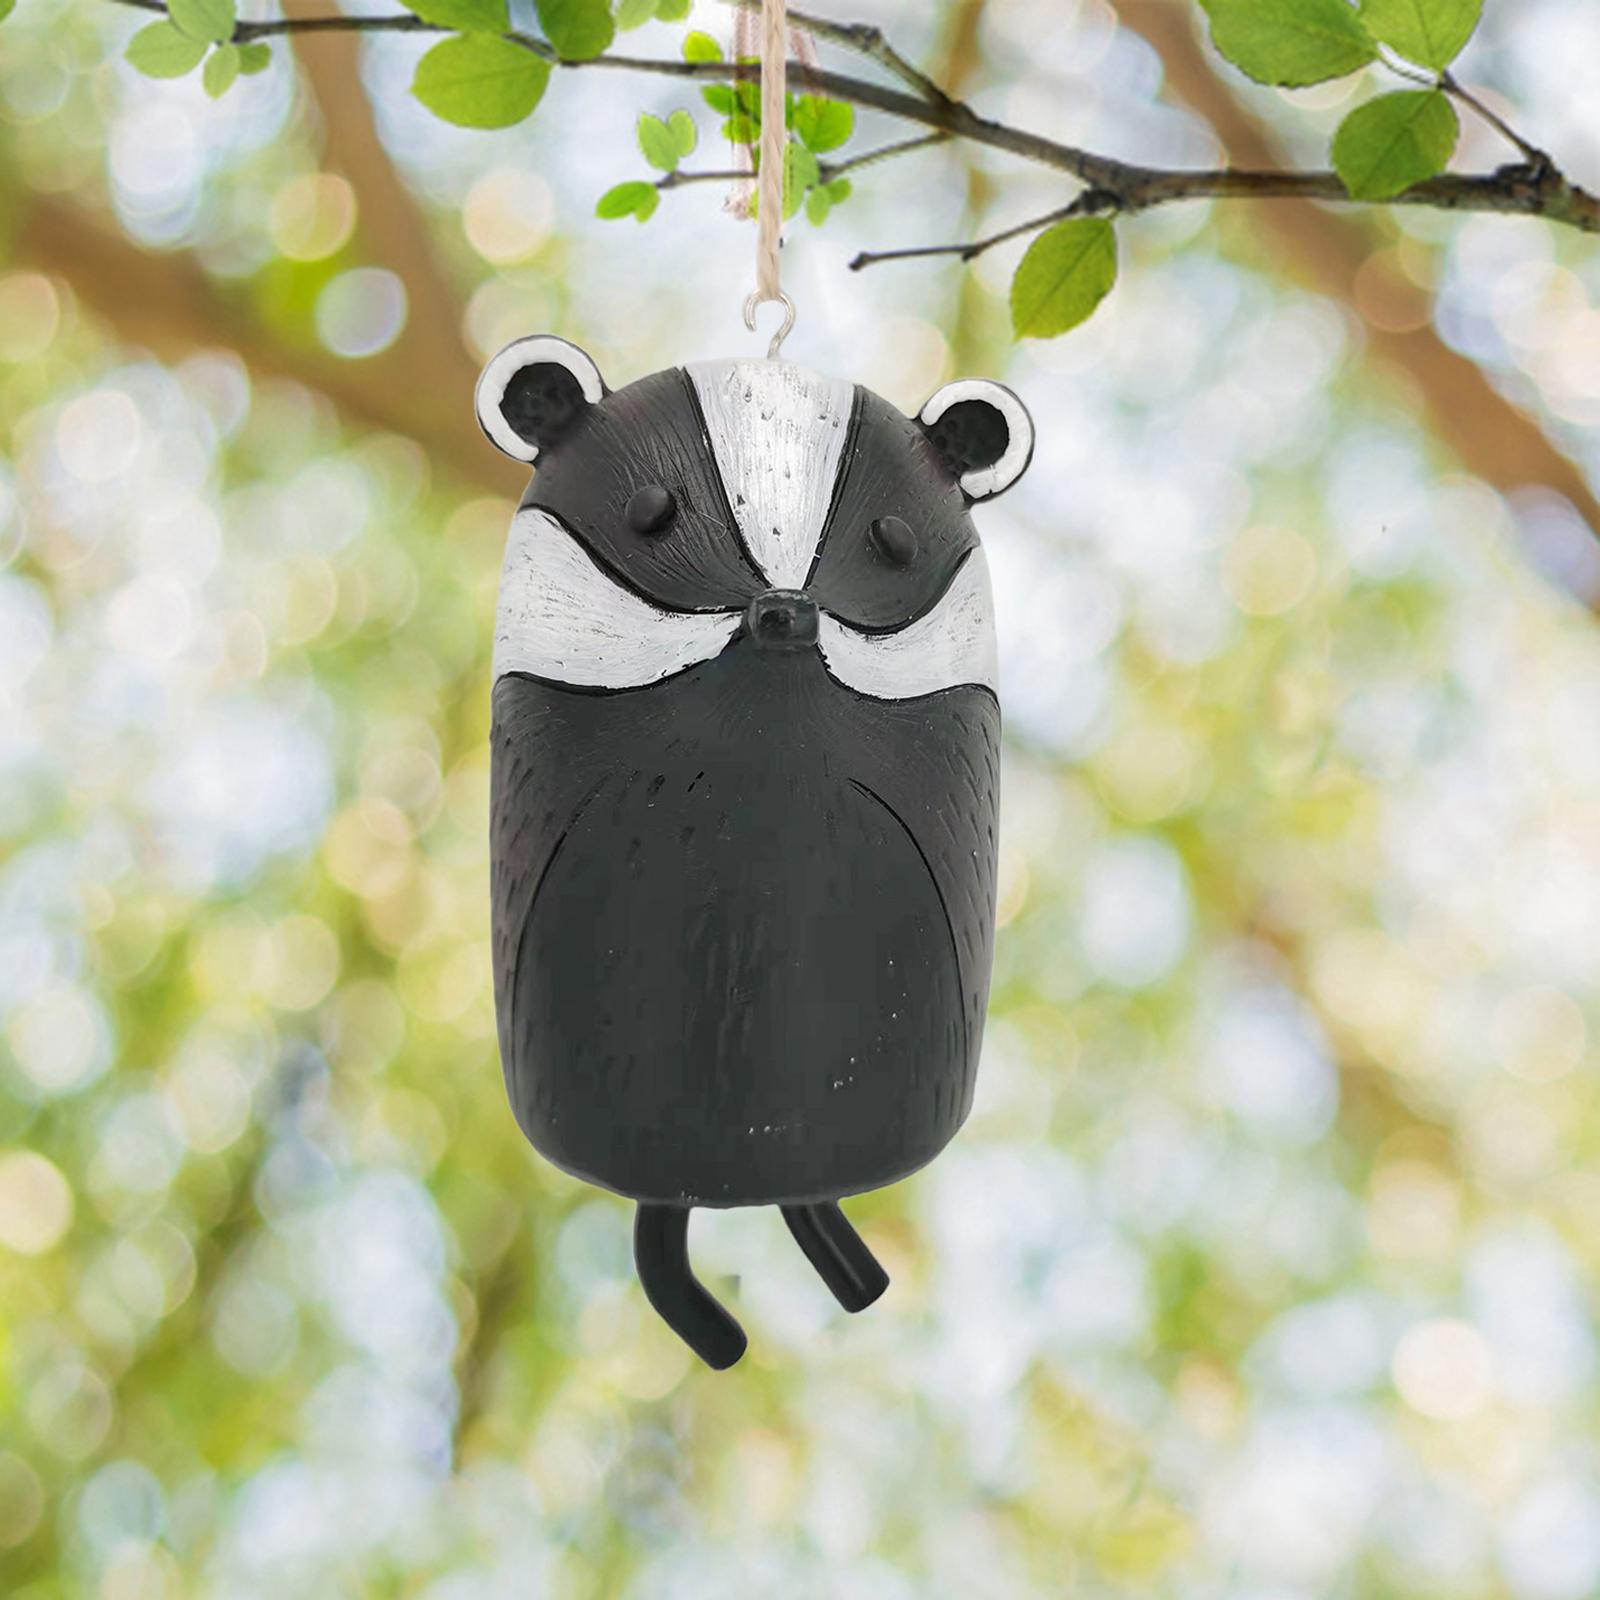 Cute Rustic Animal Wind Chimes Hanging Aeolian Bell for Gift Garden Decor F